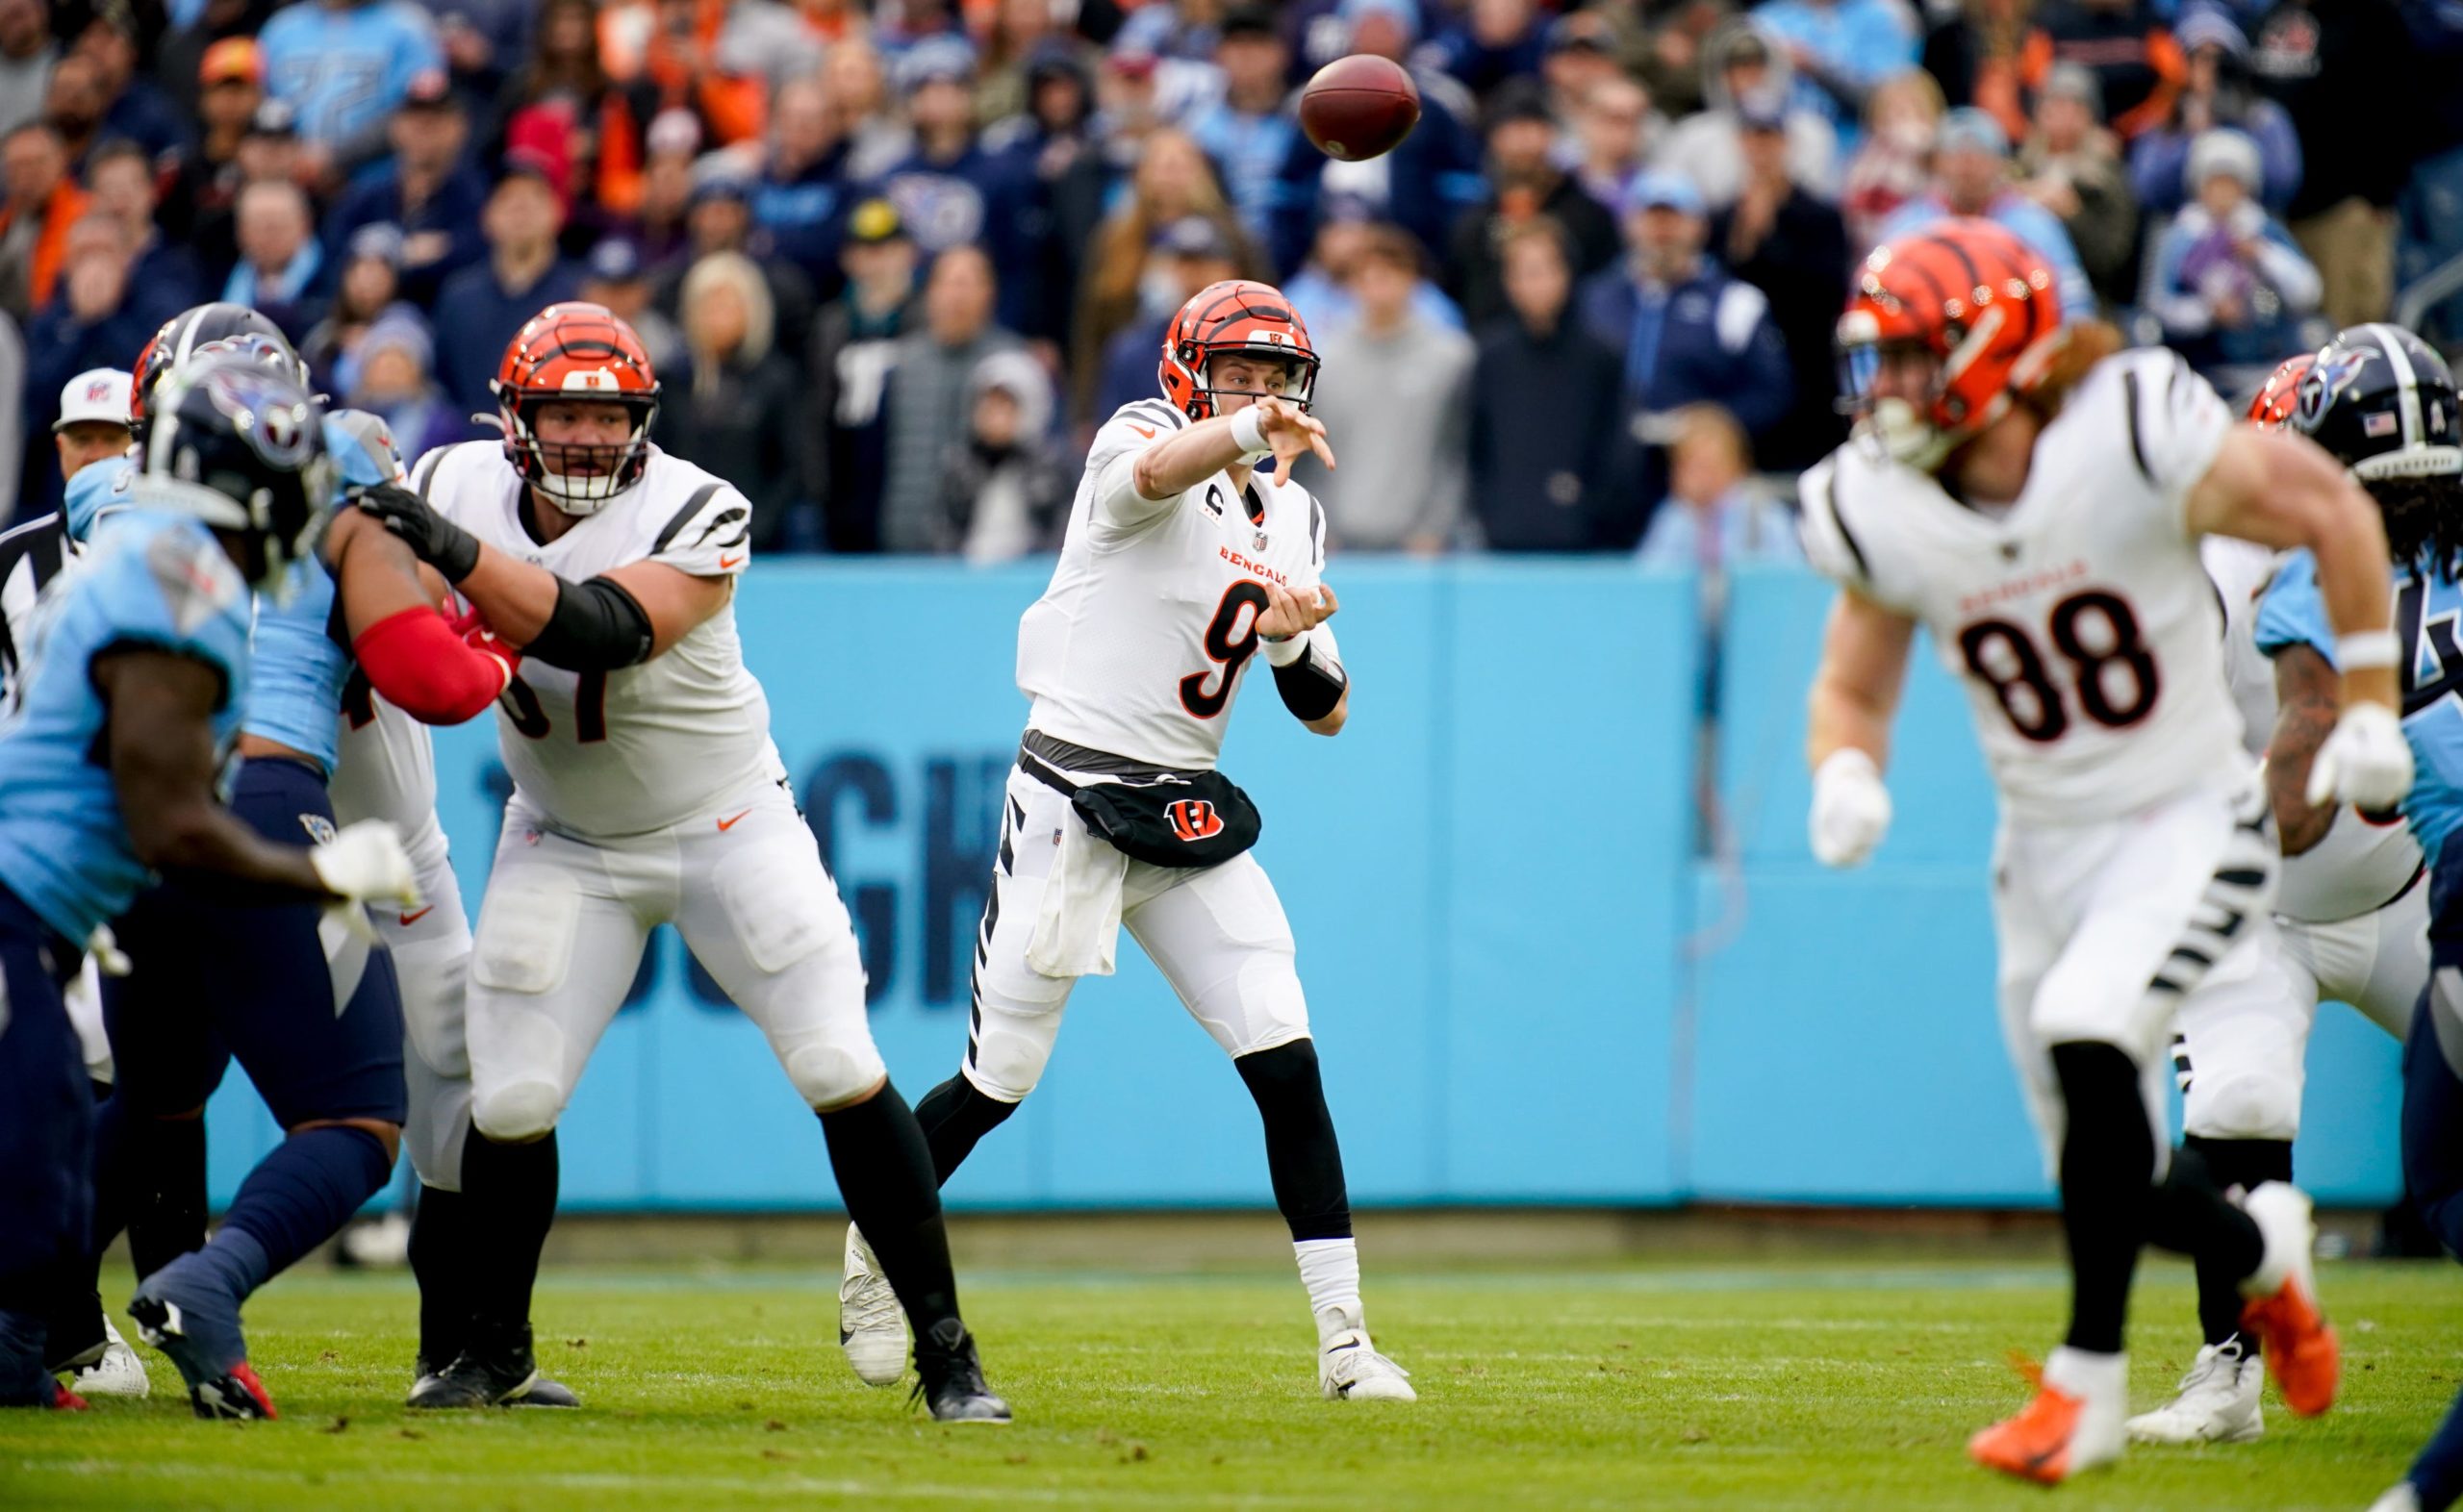 Mike Martz: Bengals Look Ready for Stretch Run